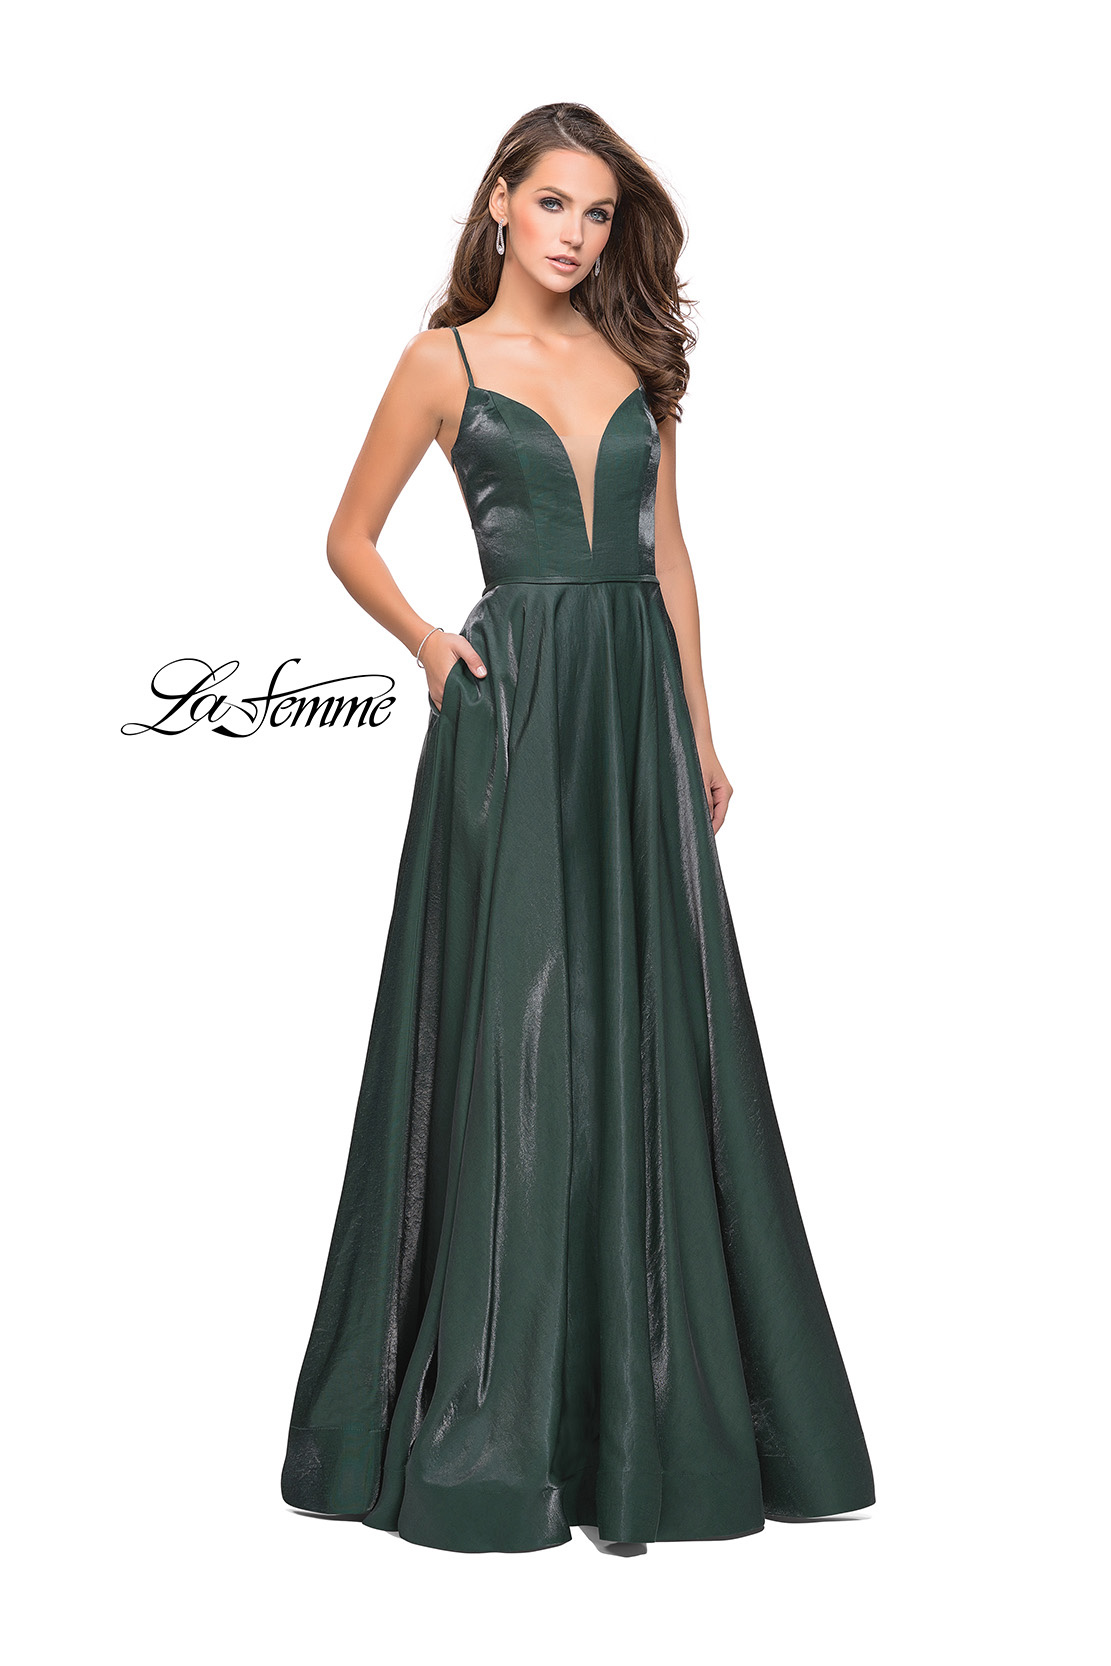 Green La Femme Prom Dress with Ball Gown Skirt